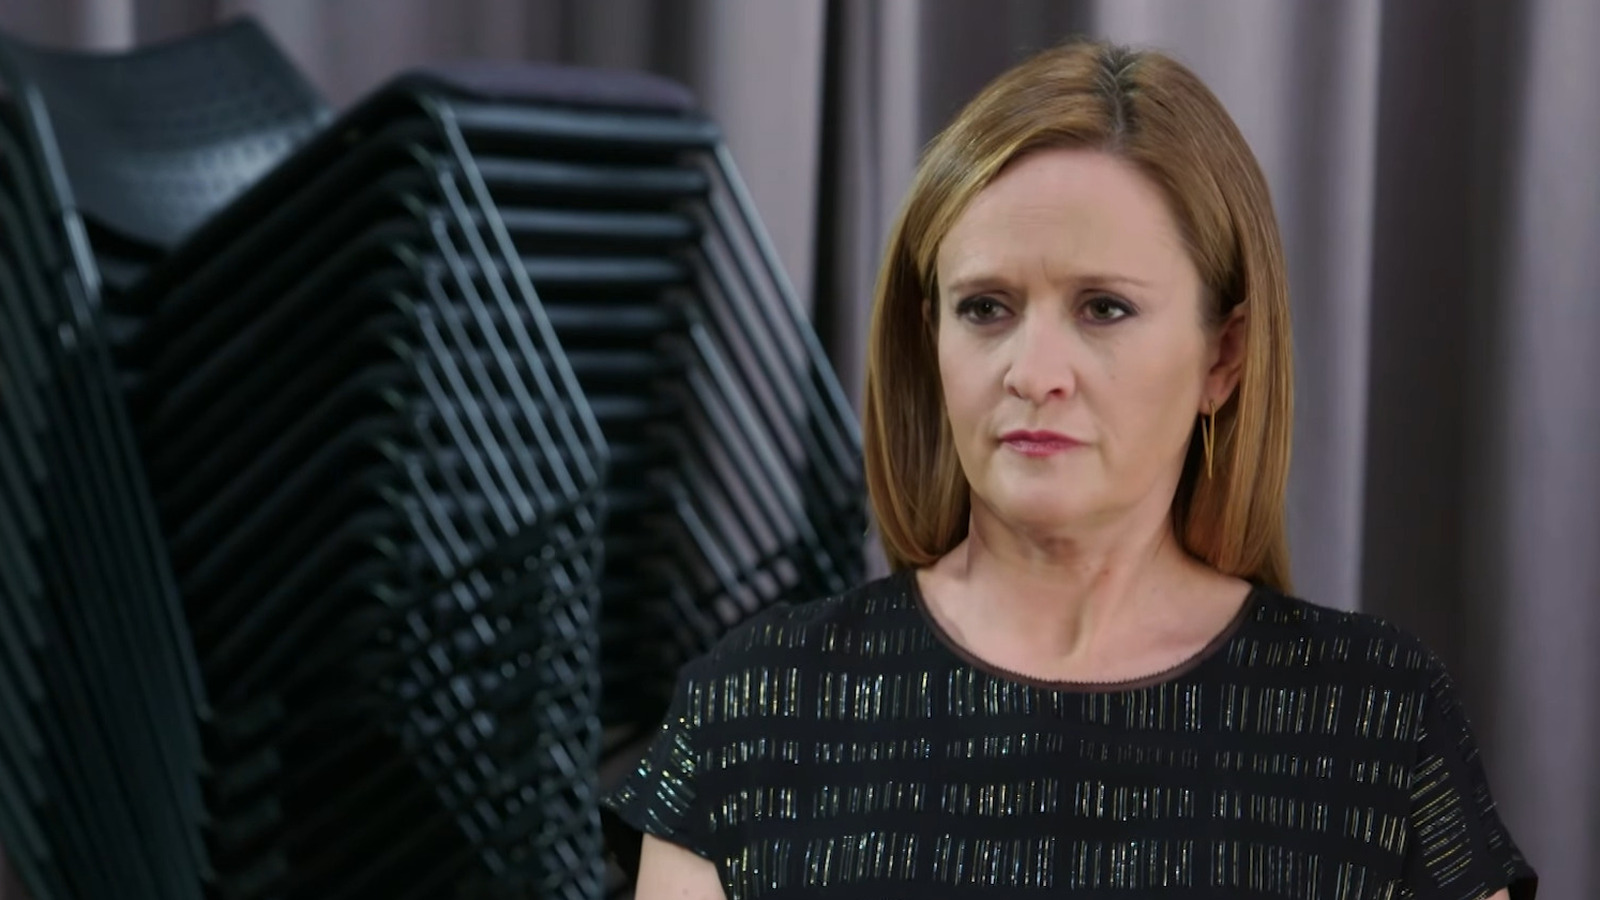 Why was the Full Frontal with Samantha Bee canceled?